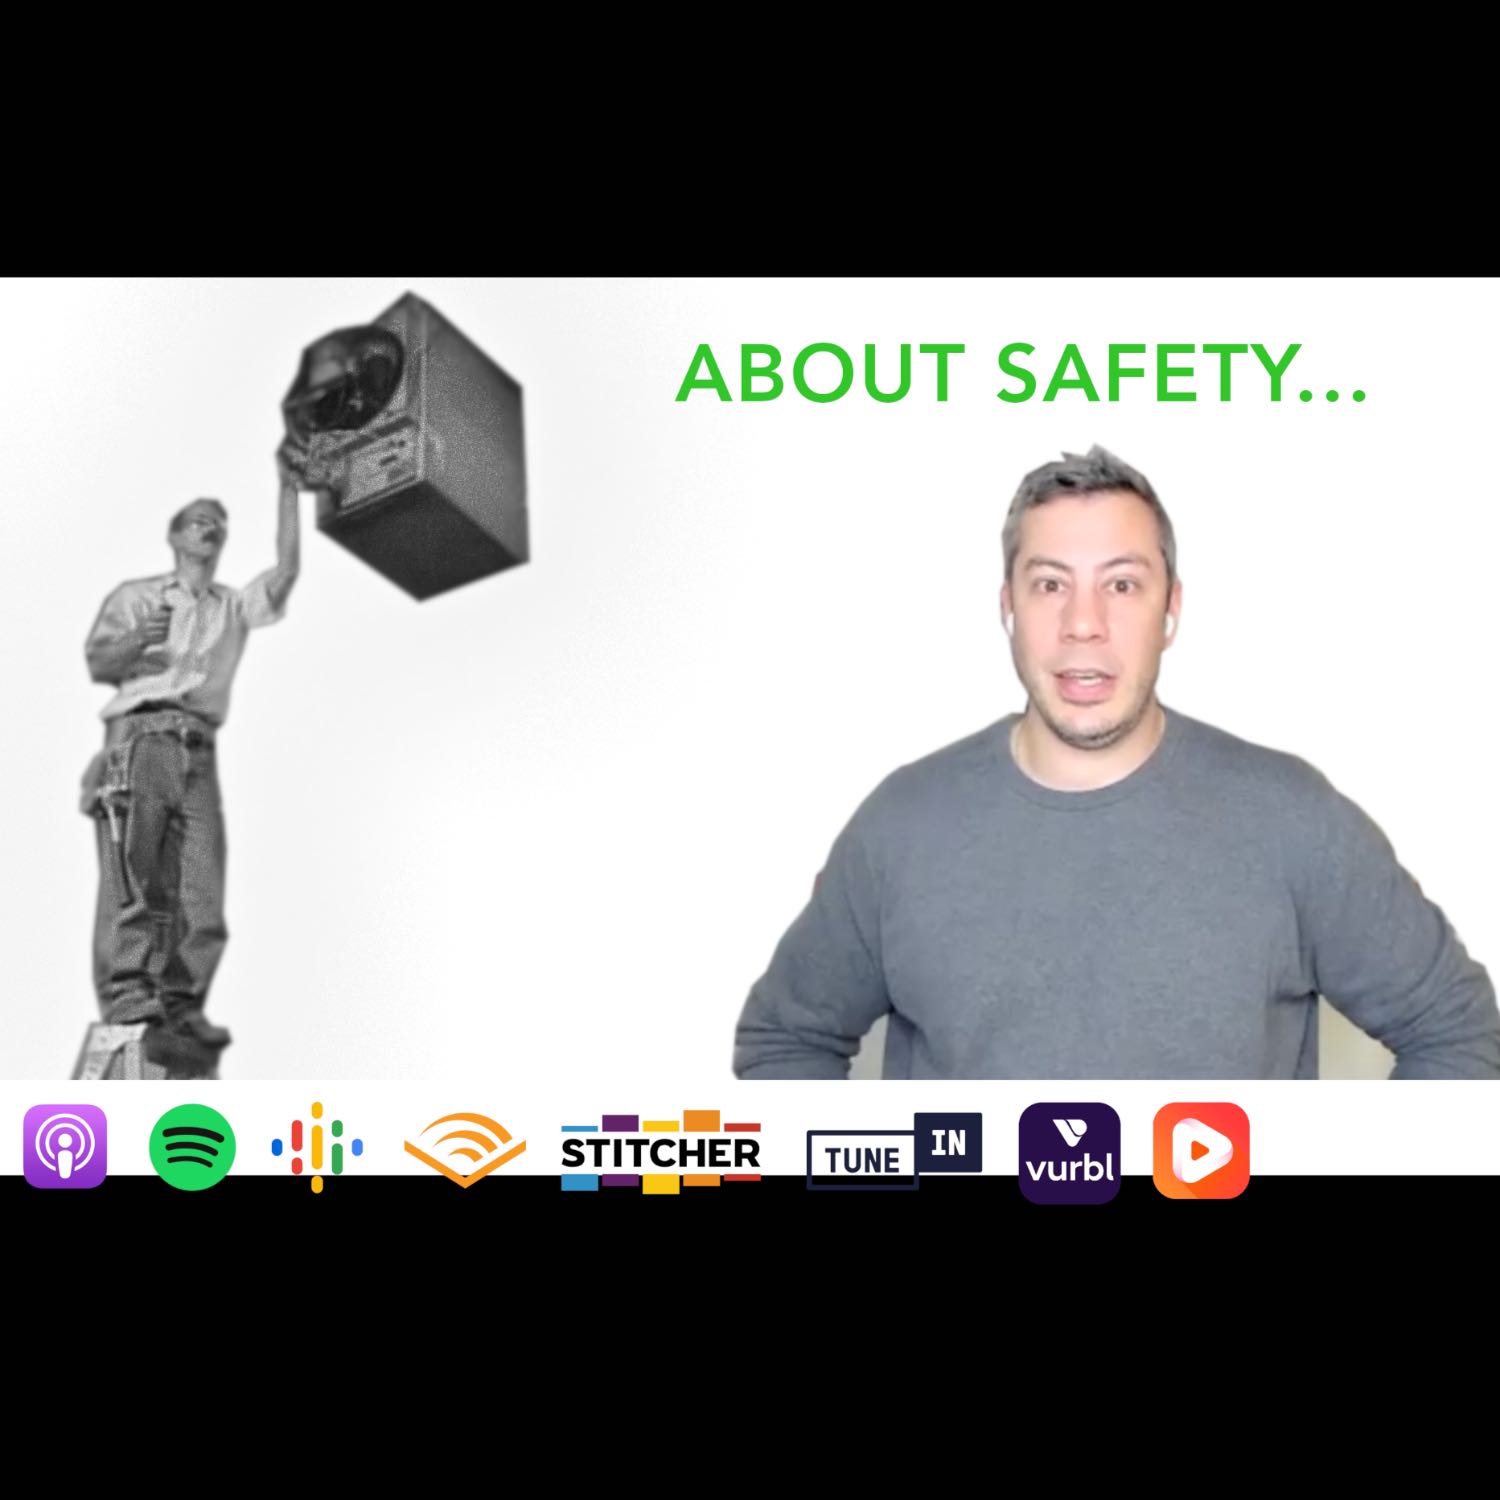 Thinking About Safety! And what to do about it